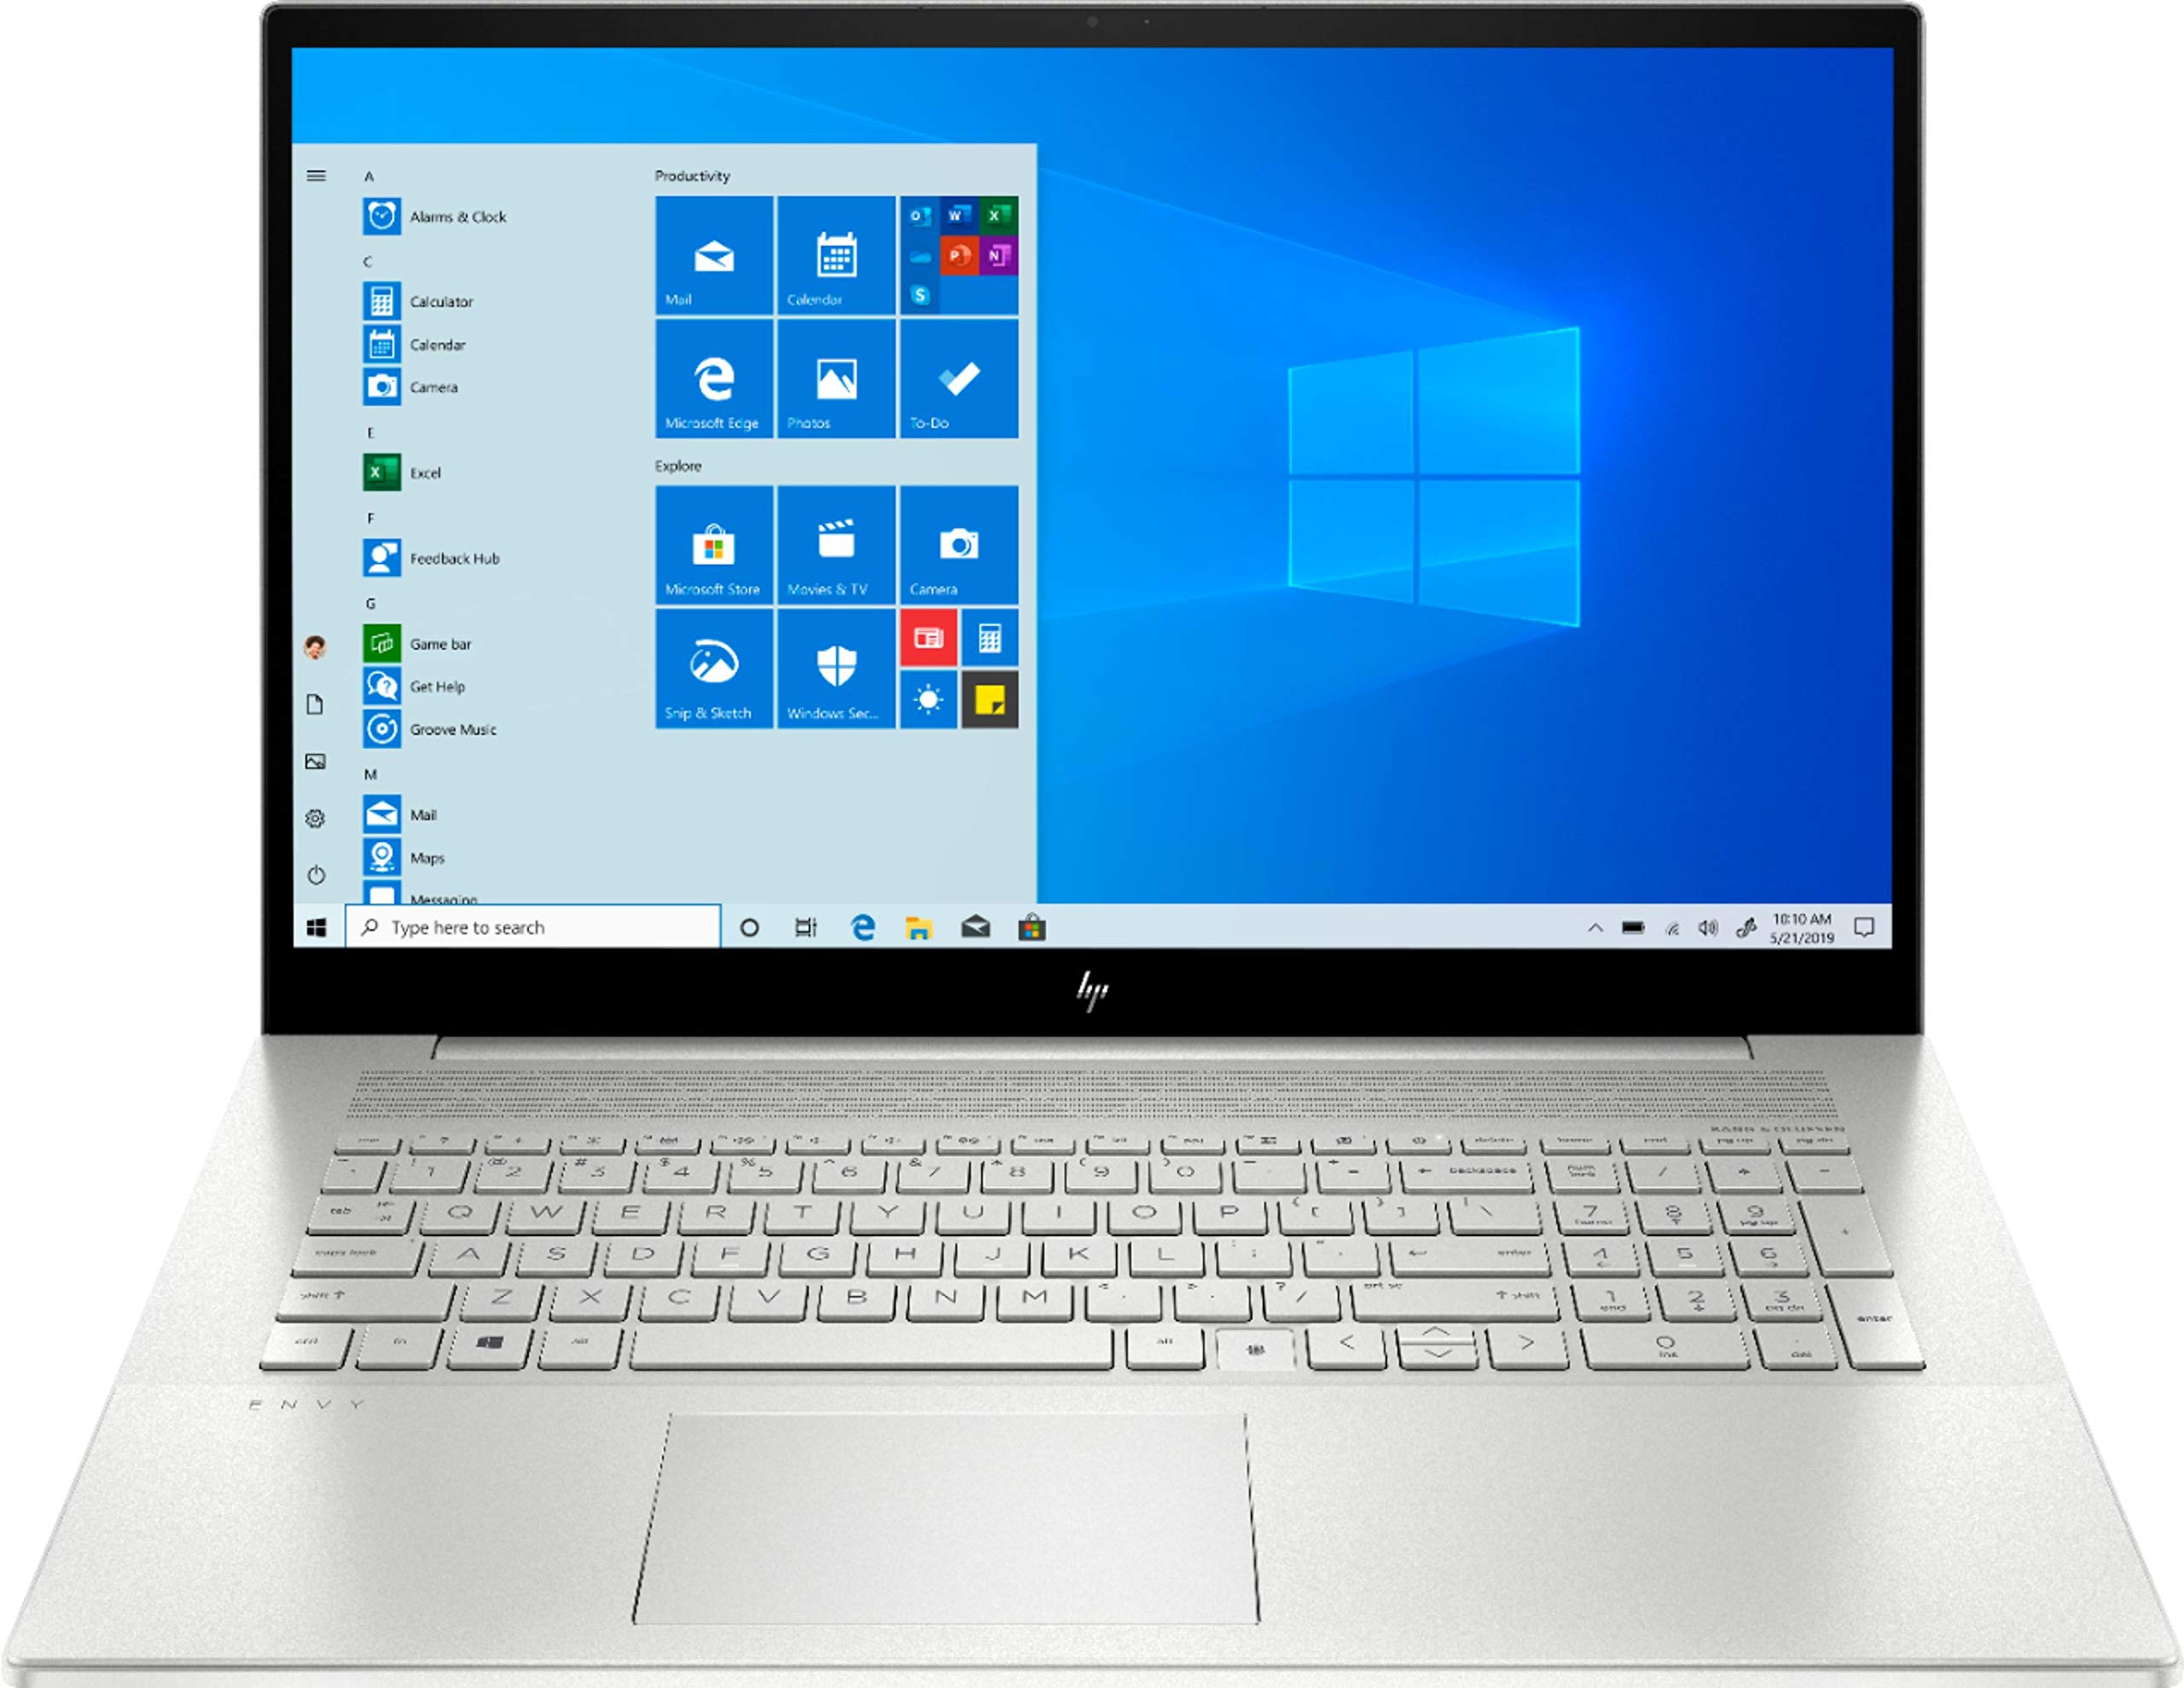 HP Envy 17.3 Inch FHD Touch-Screen 512GB SSD + 32GB Optane i7 2-in-1 Laptop (12GB RAM, Quad-Core i7-1065G7, GeForce MX330, Windows 10 Home) Natural Silver 17M-CG0013DX